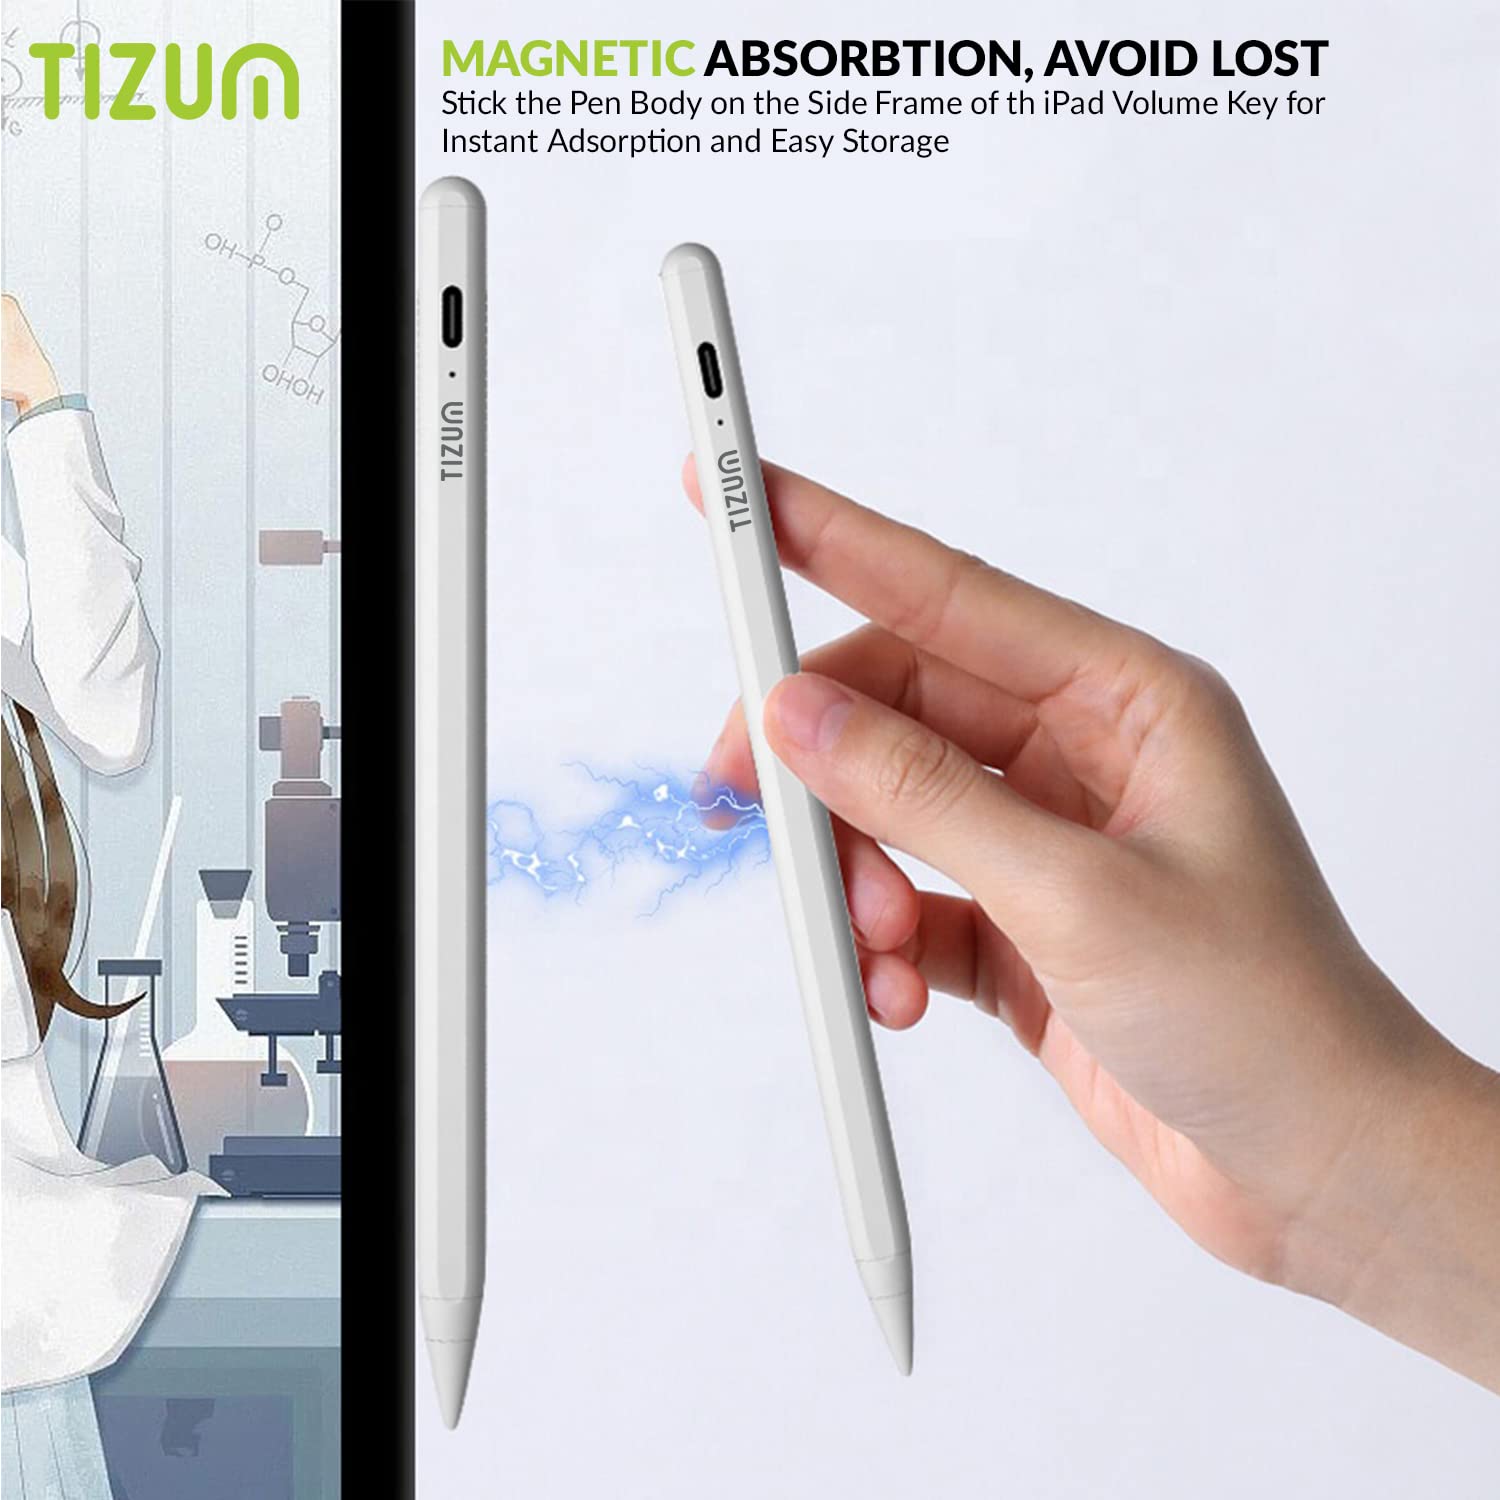 2Nd Gen Stylus/Digital Pen for Apple Ipad and Touchscreen Devices